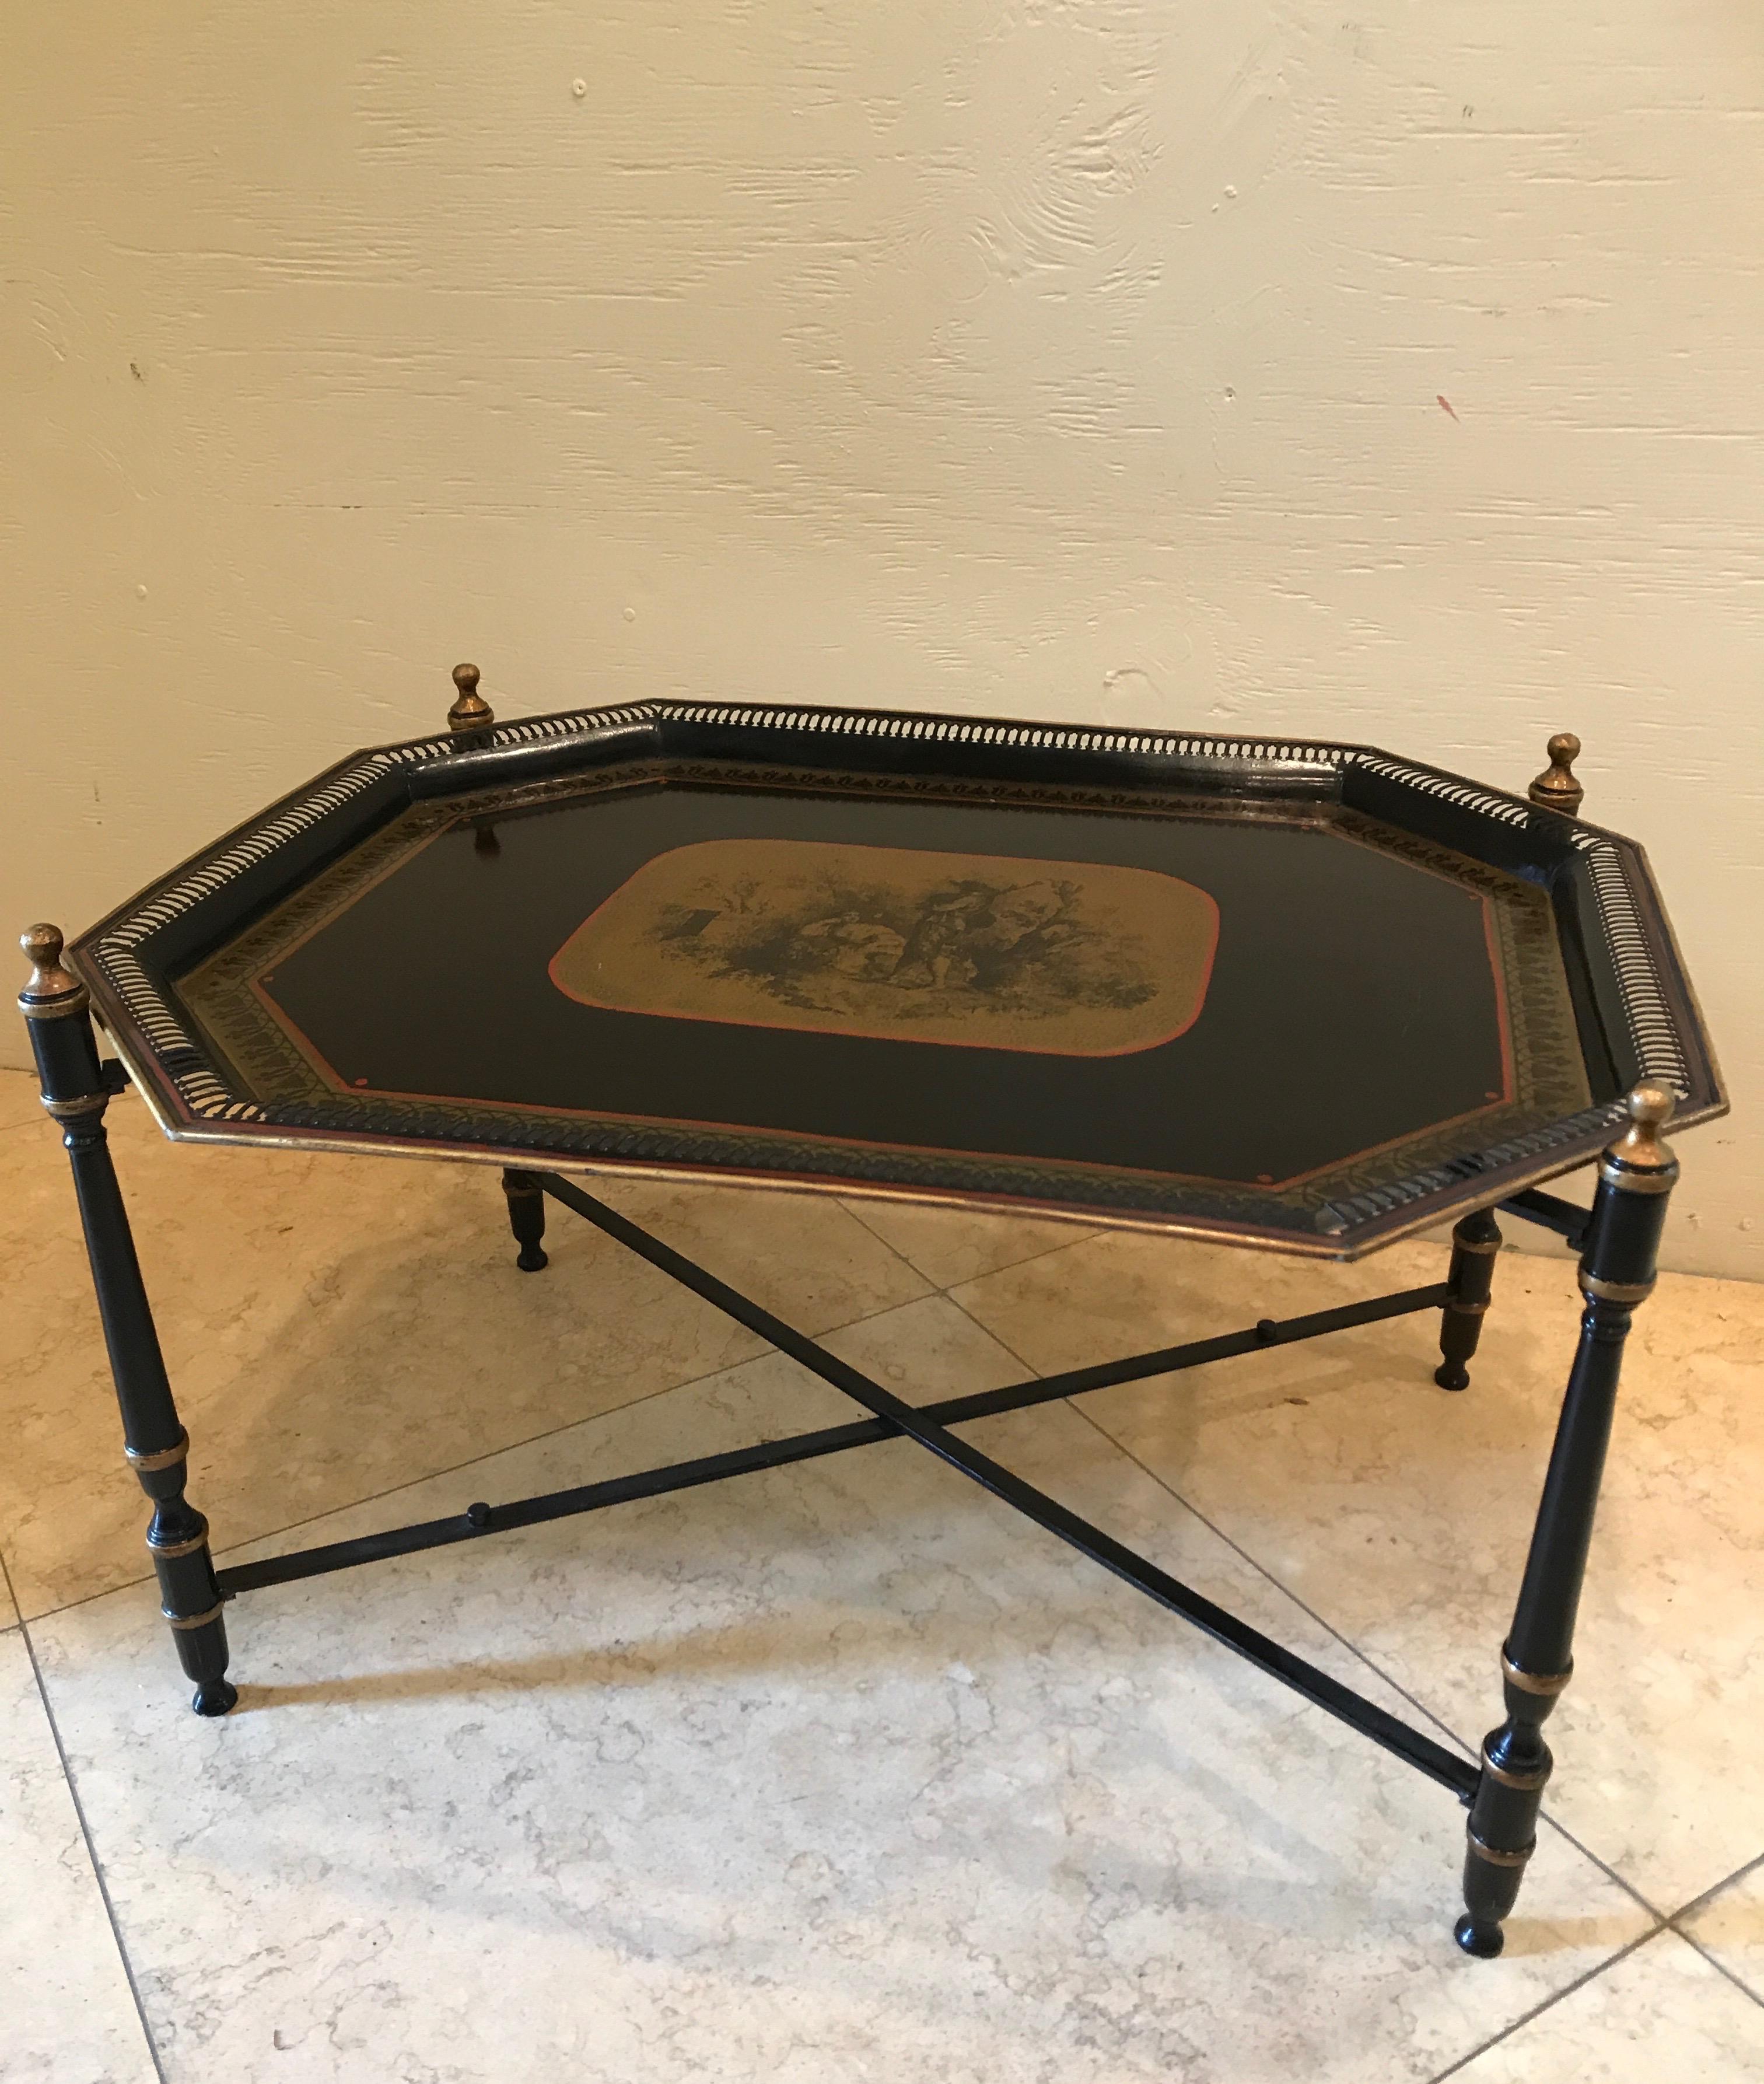 Black and gold tole tray table with a central scene.